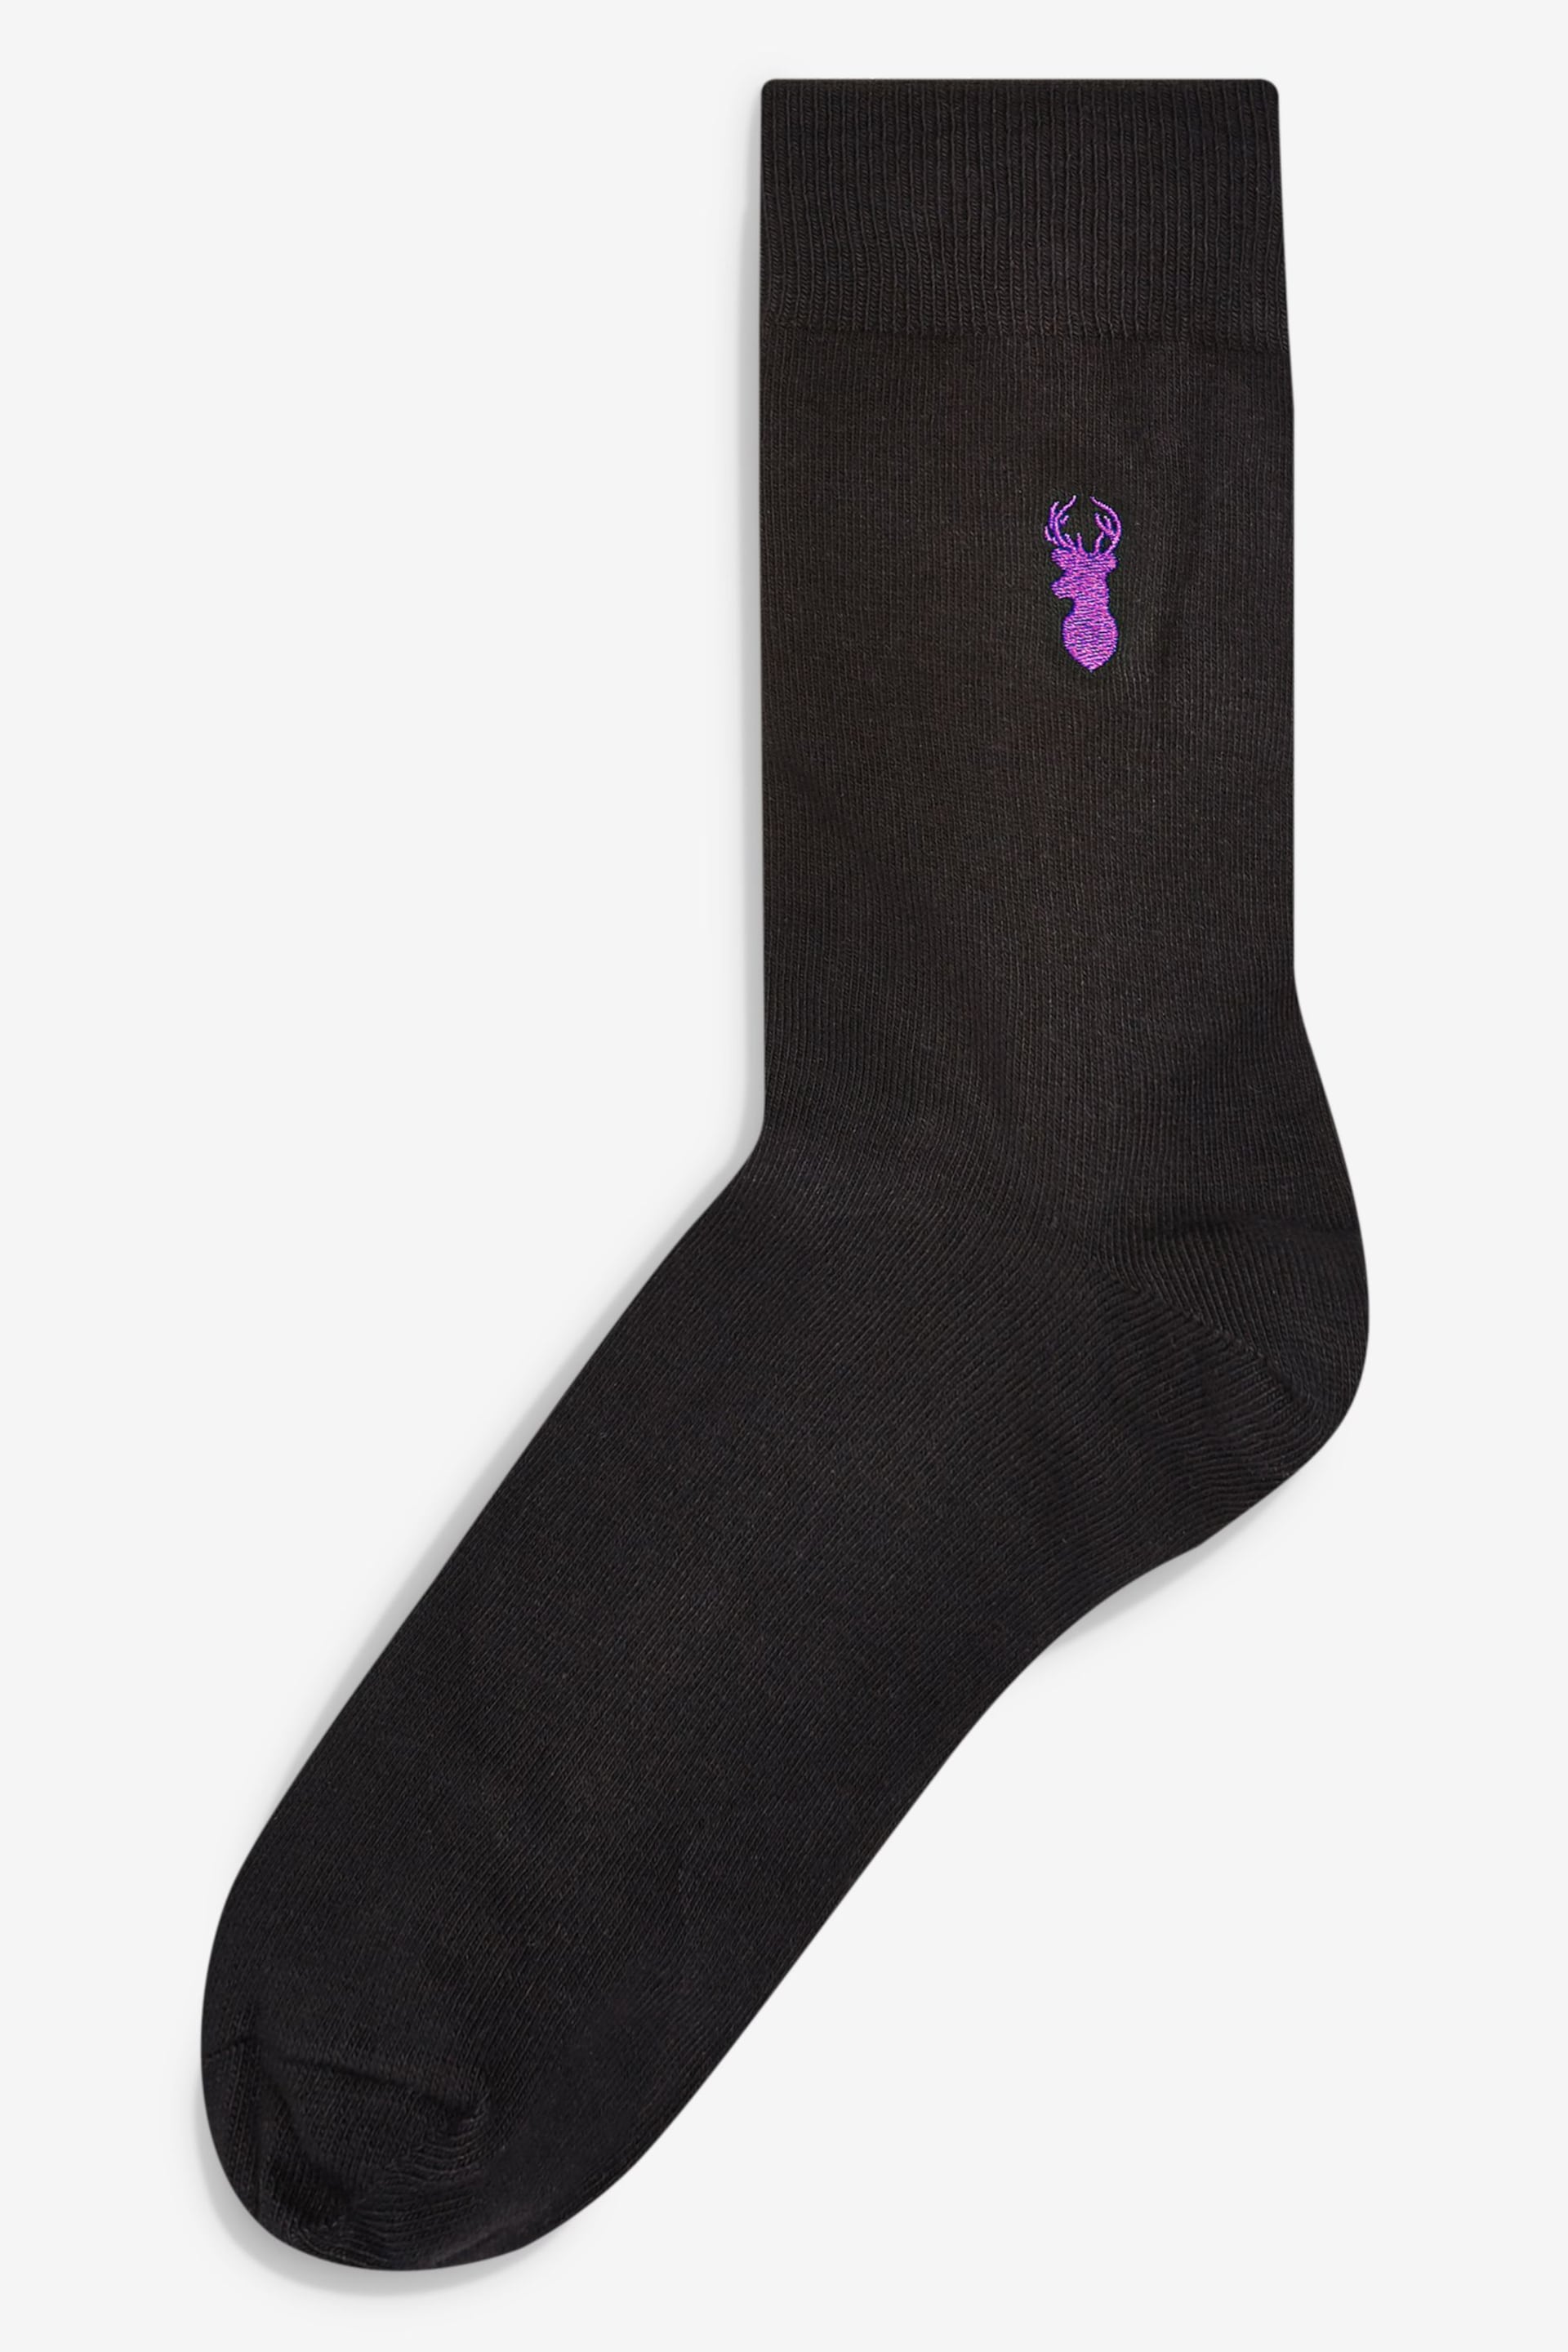 Black Multi Stag 8 Pack Embroidered Stag Socks - Image 5 of 10